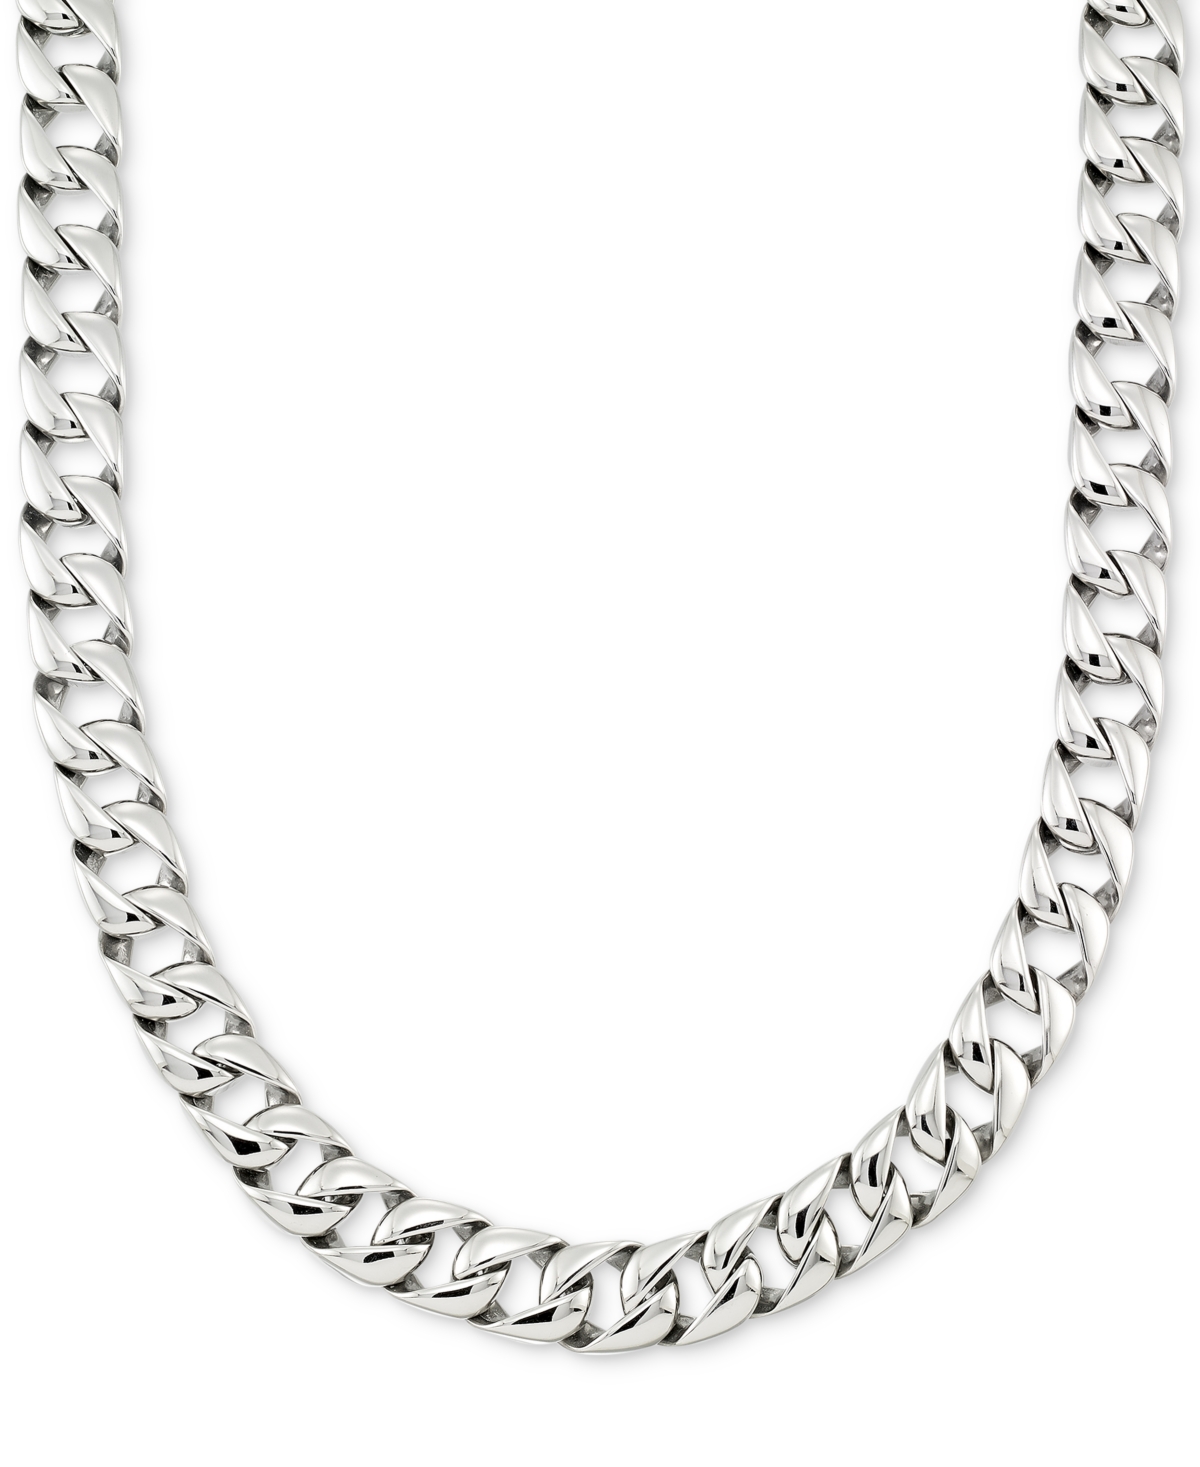 Legacy for Men by Simone I. Smith Large Curb Link 24" (15 mm thick) Chain Necklace in Stainless Steel